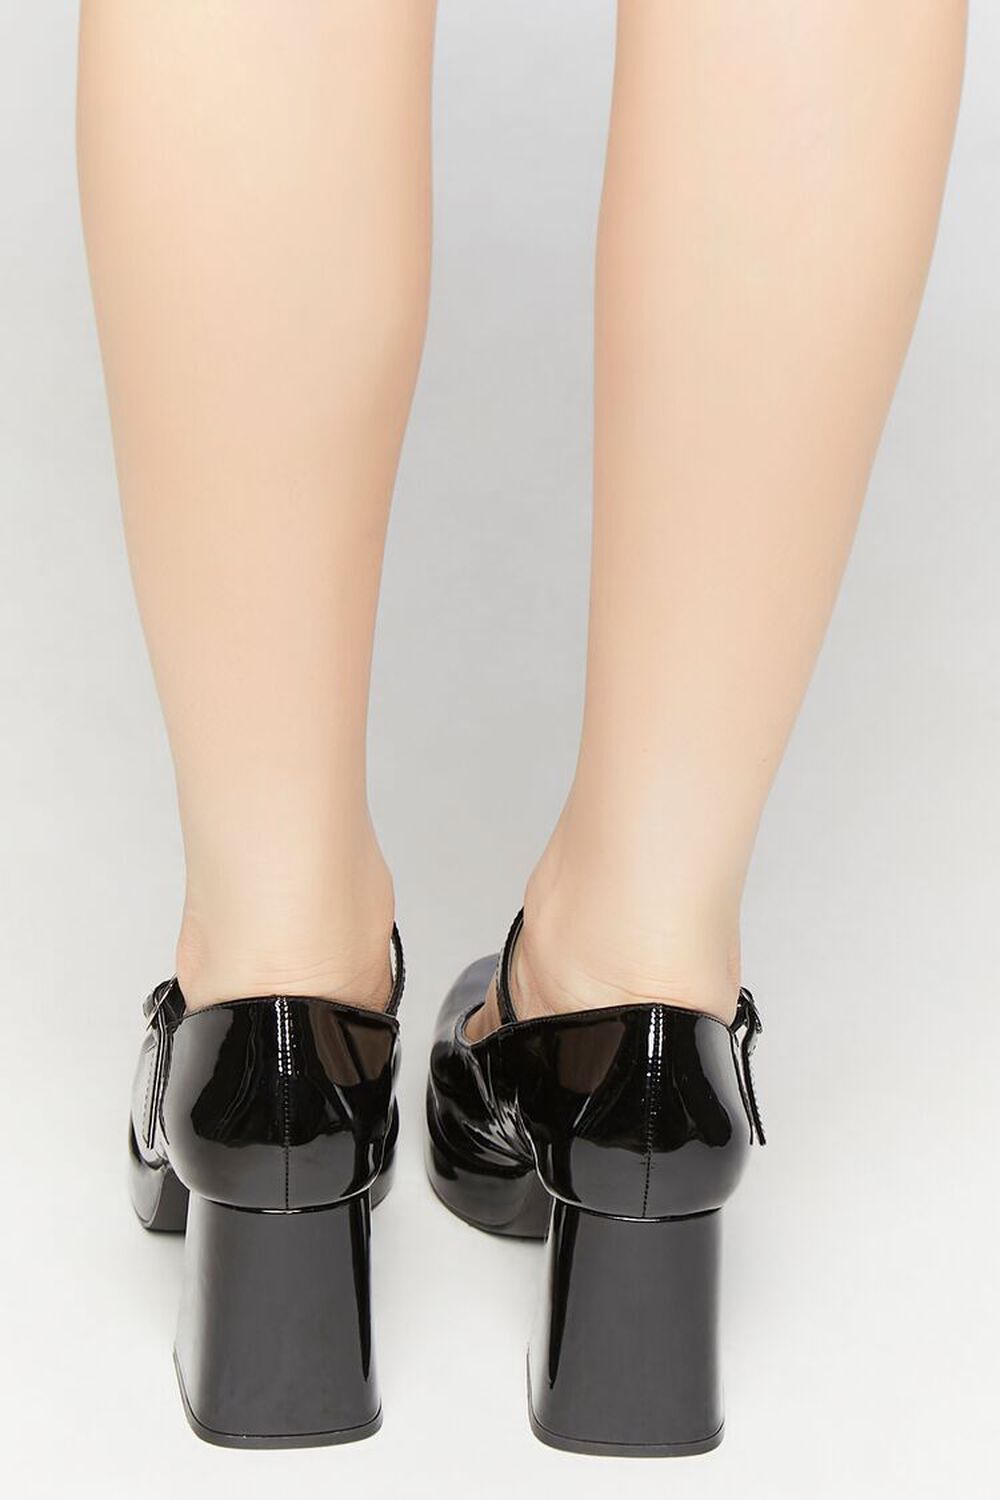 BLACK Faux Patent Leather Mary Jane Heels, image 3